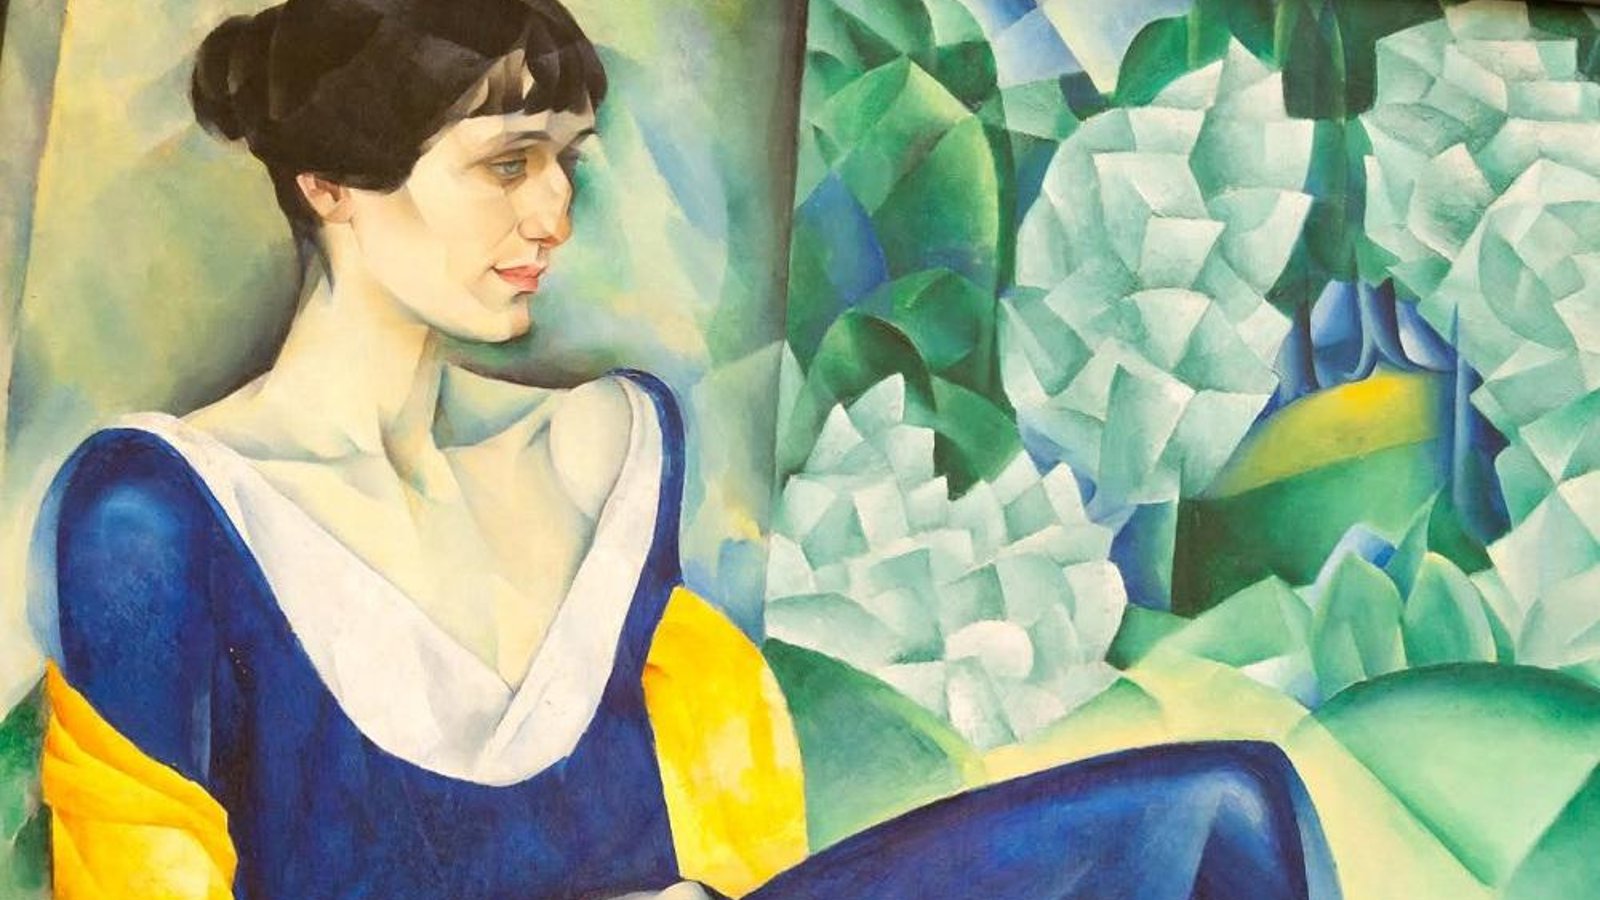 Anna Akhmatova: The Life of a Poet - Russia's Great and Beautiful Muse